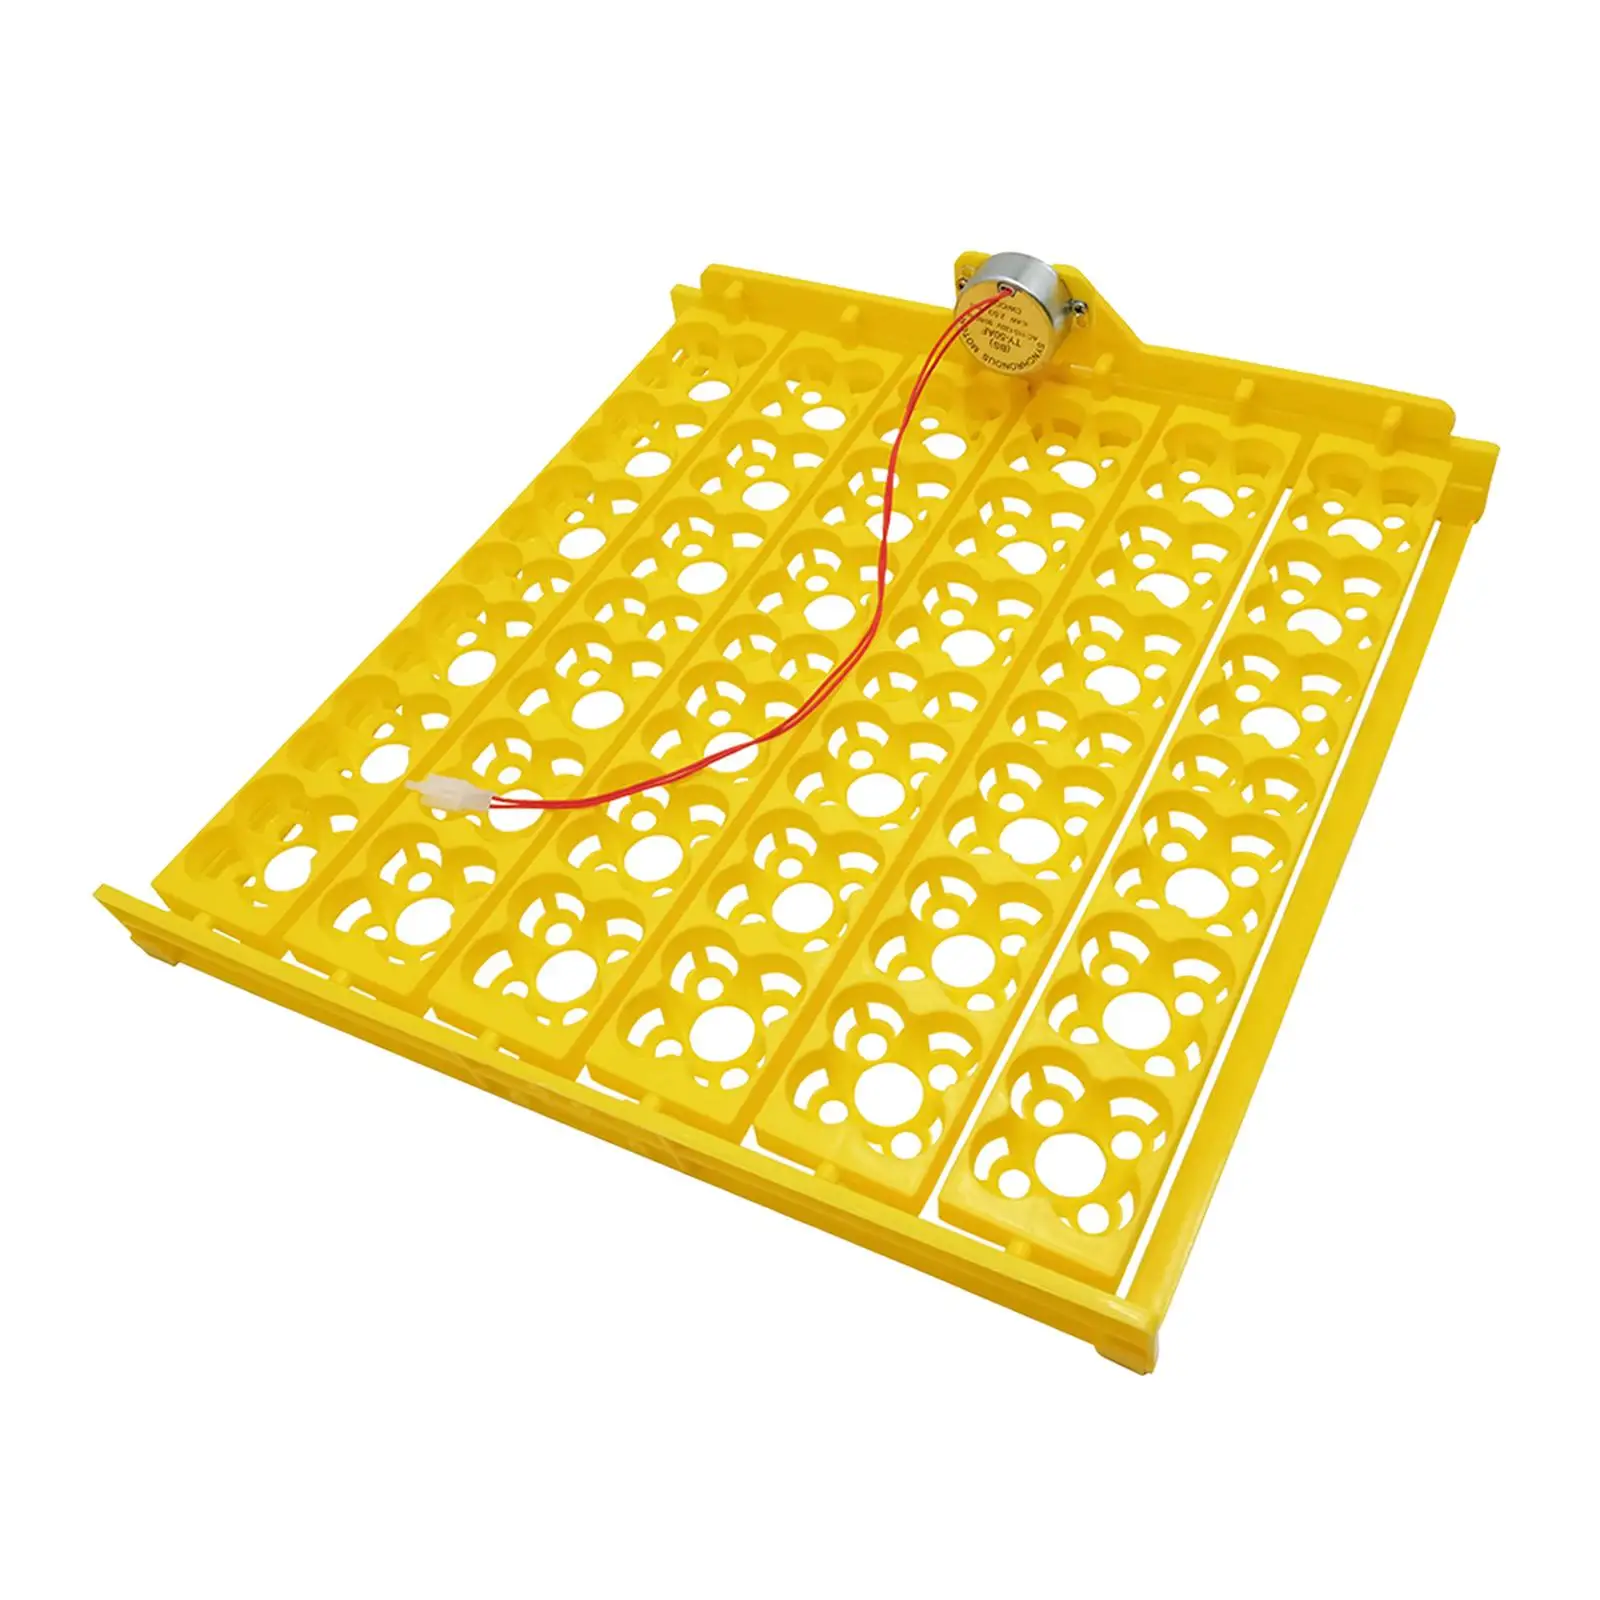 36/156 Eggs Incubator Automatic Turner Tray with Motor for Geese Quail Bird Eggs 110V US